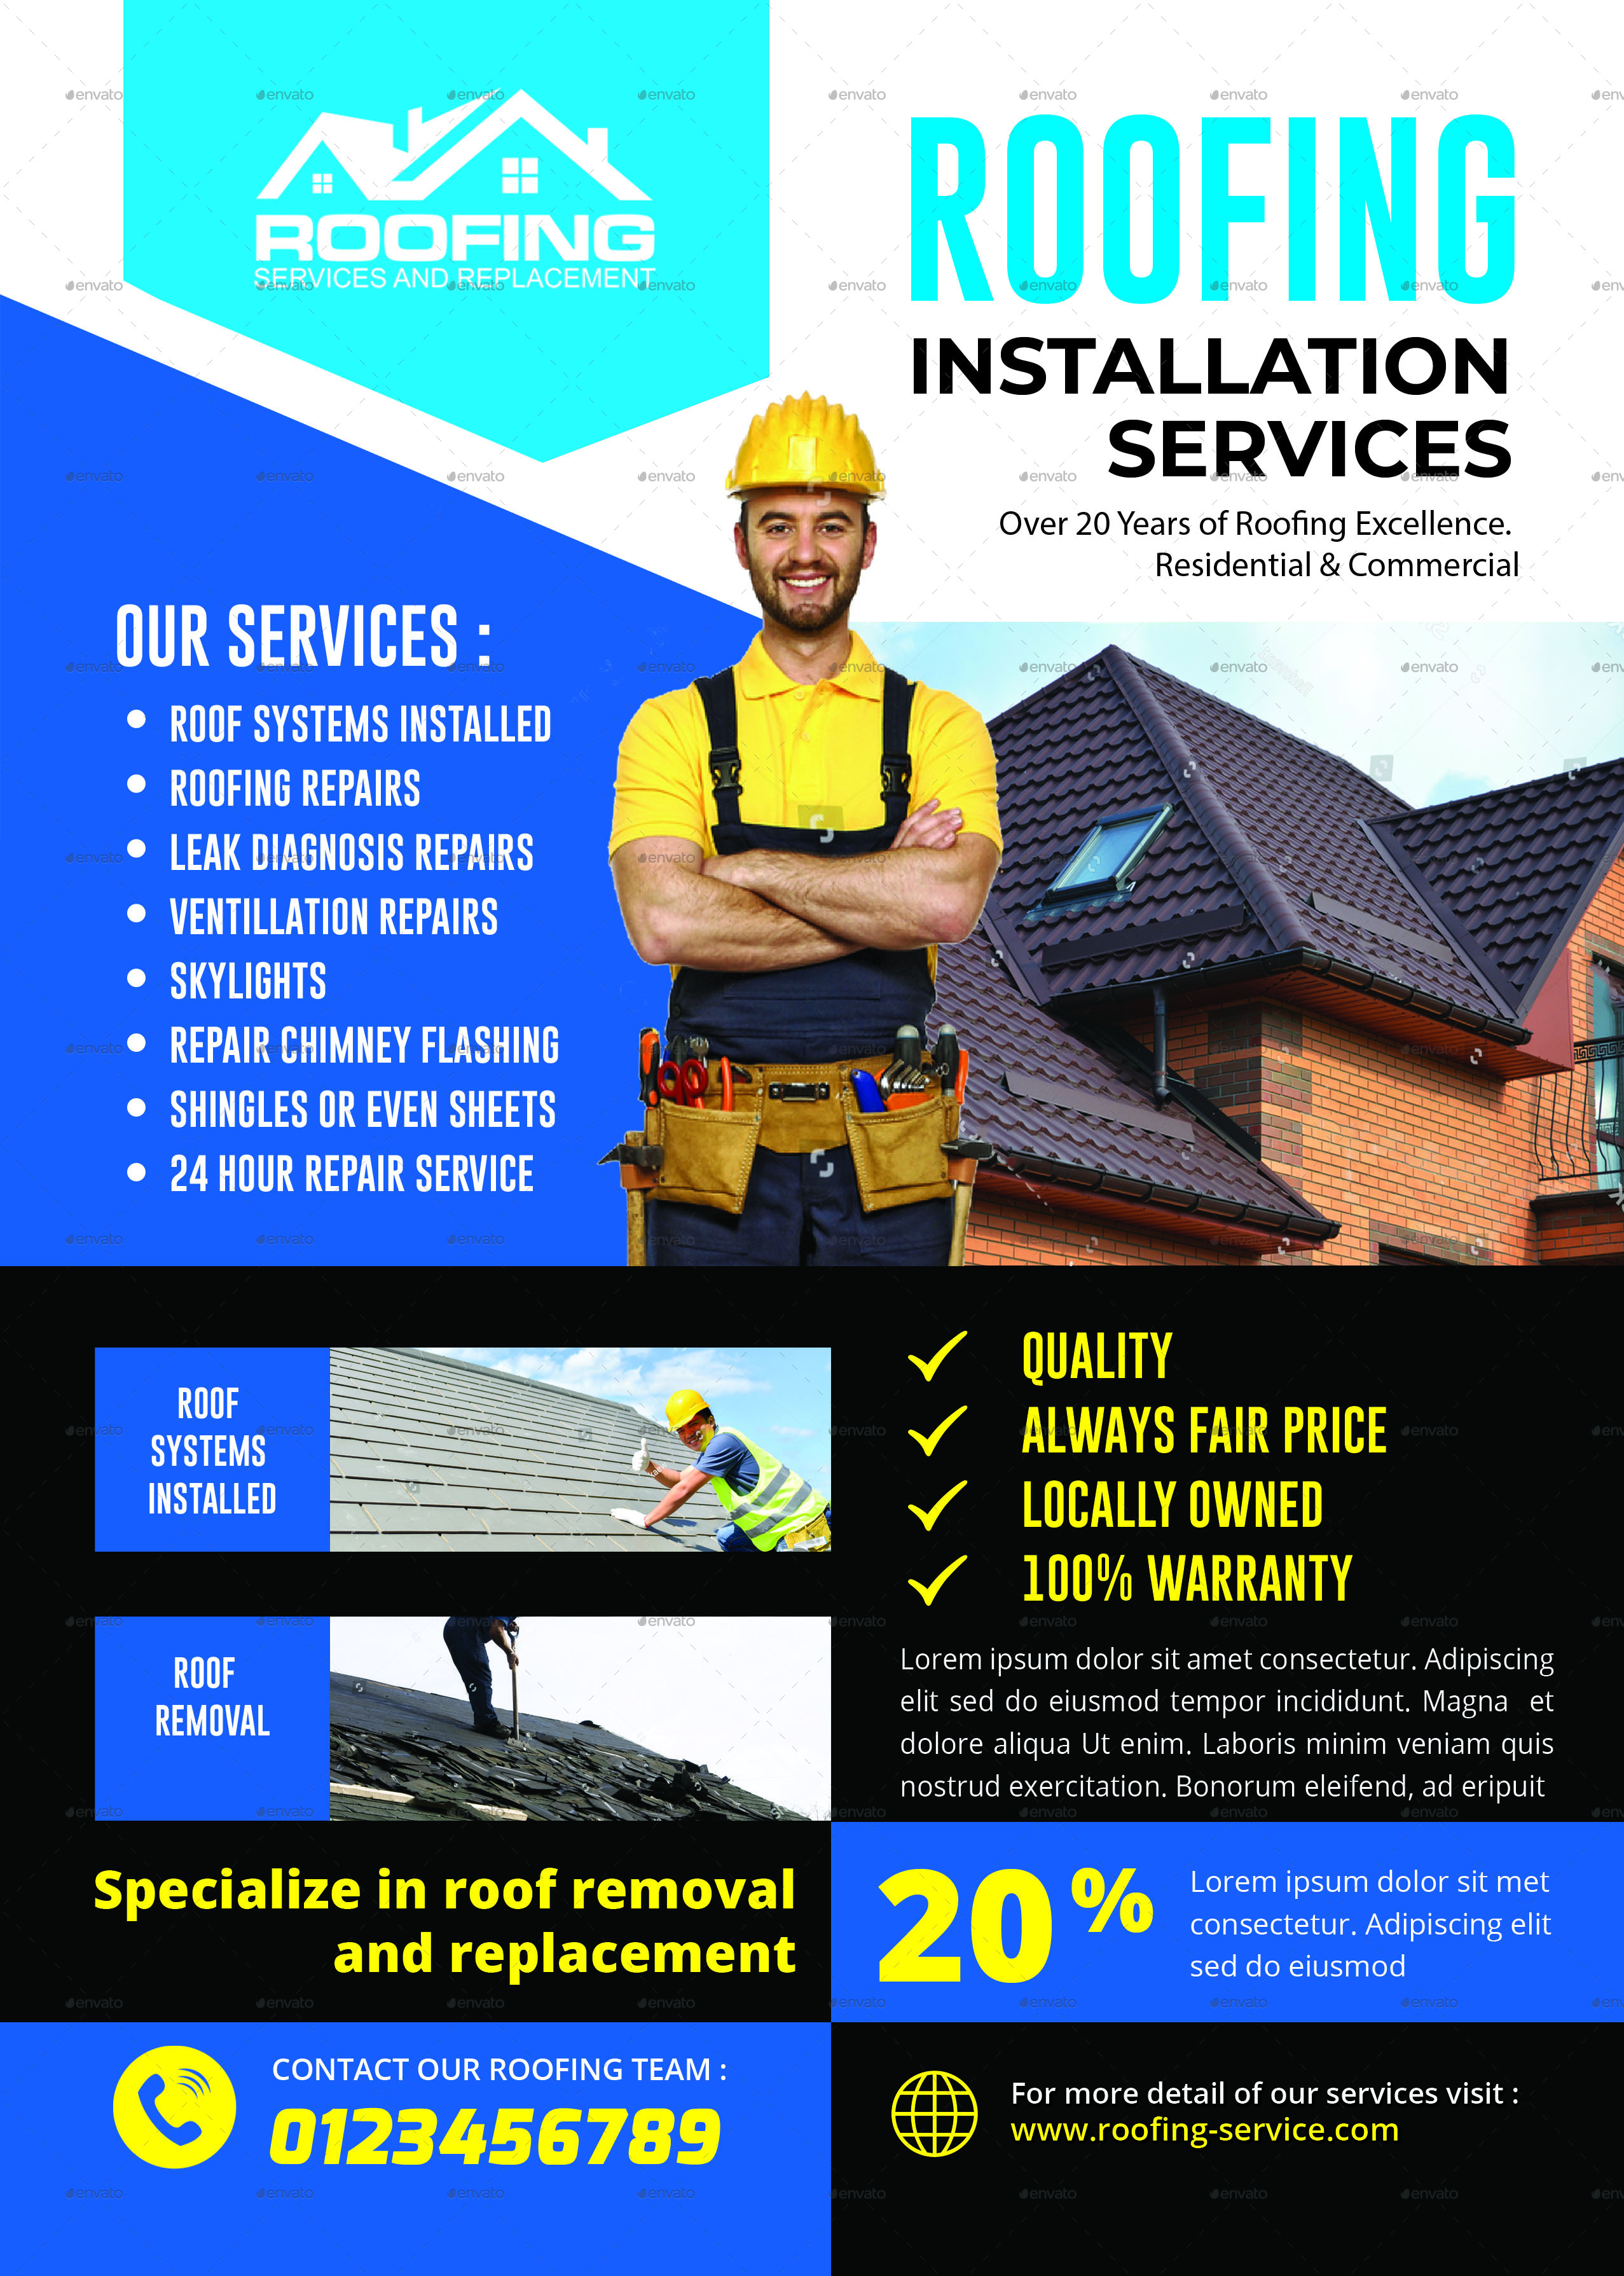 Roofing Service Flyer, Print Templates | GraphicRiver